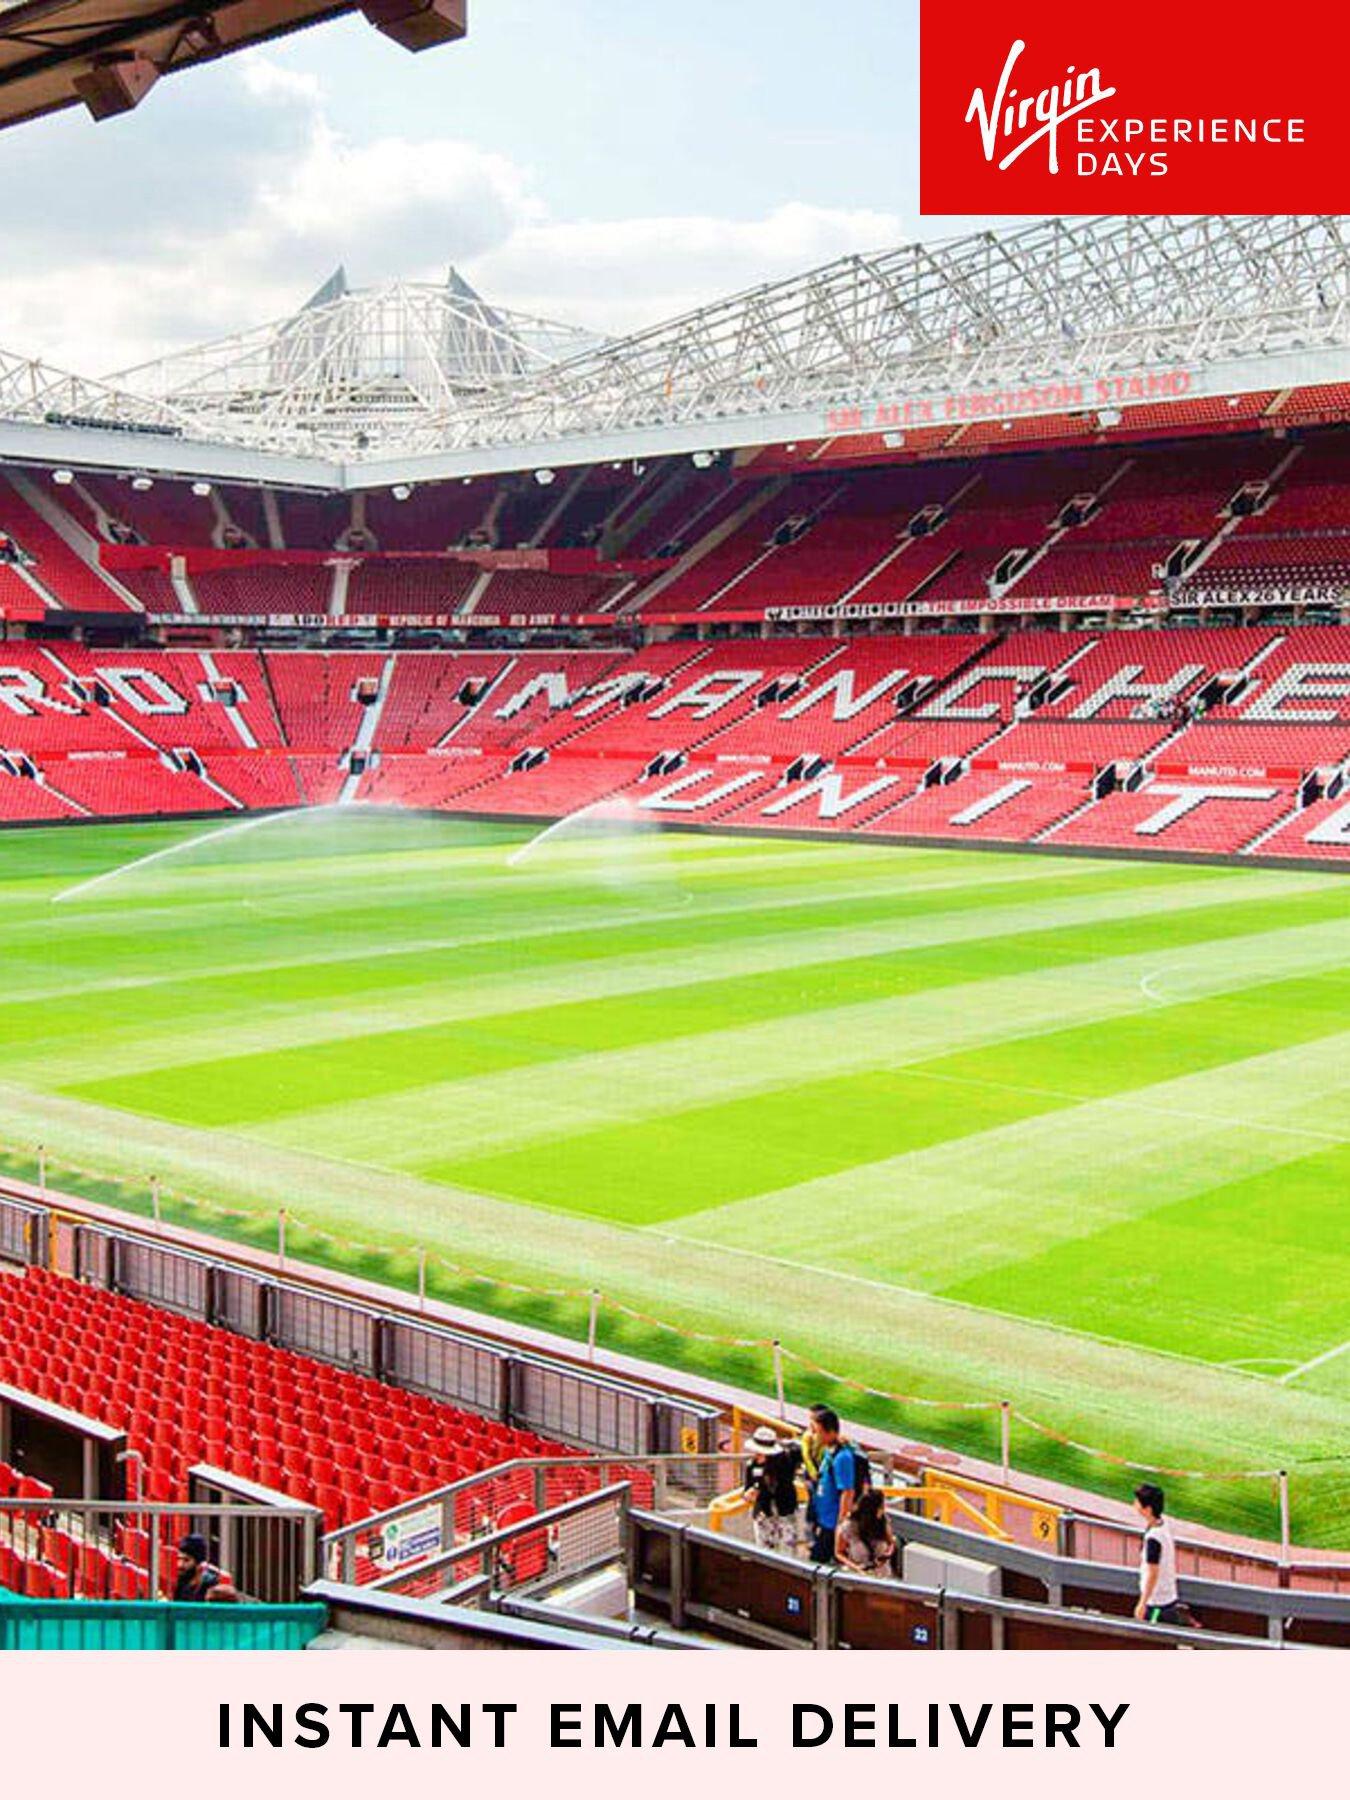 Image 1 of 2 of Virgin Experience Days Digital Voucher Manchester United Football Club Stadium Tour For Two Adults